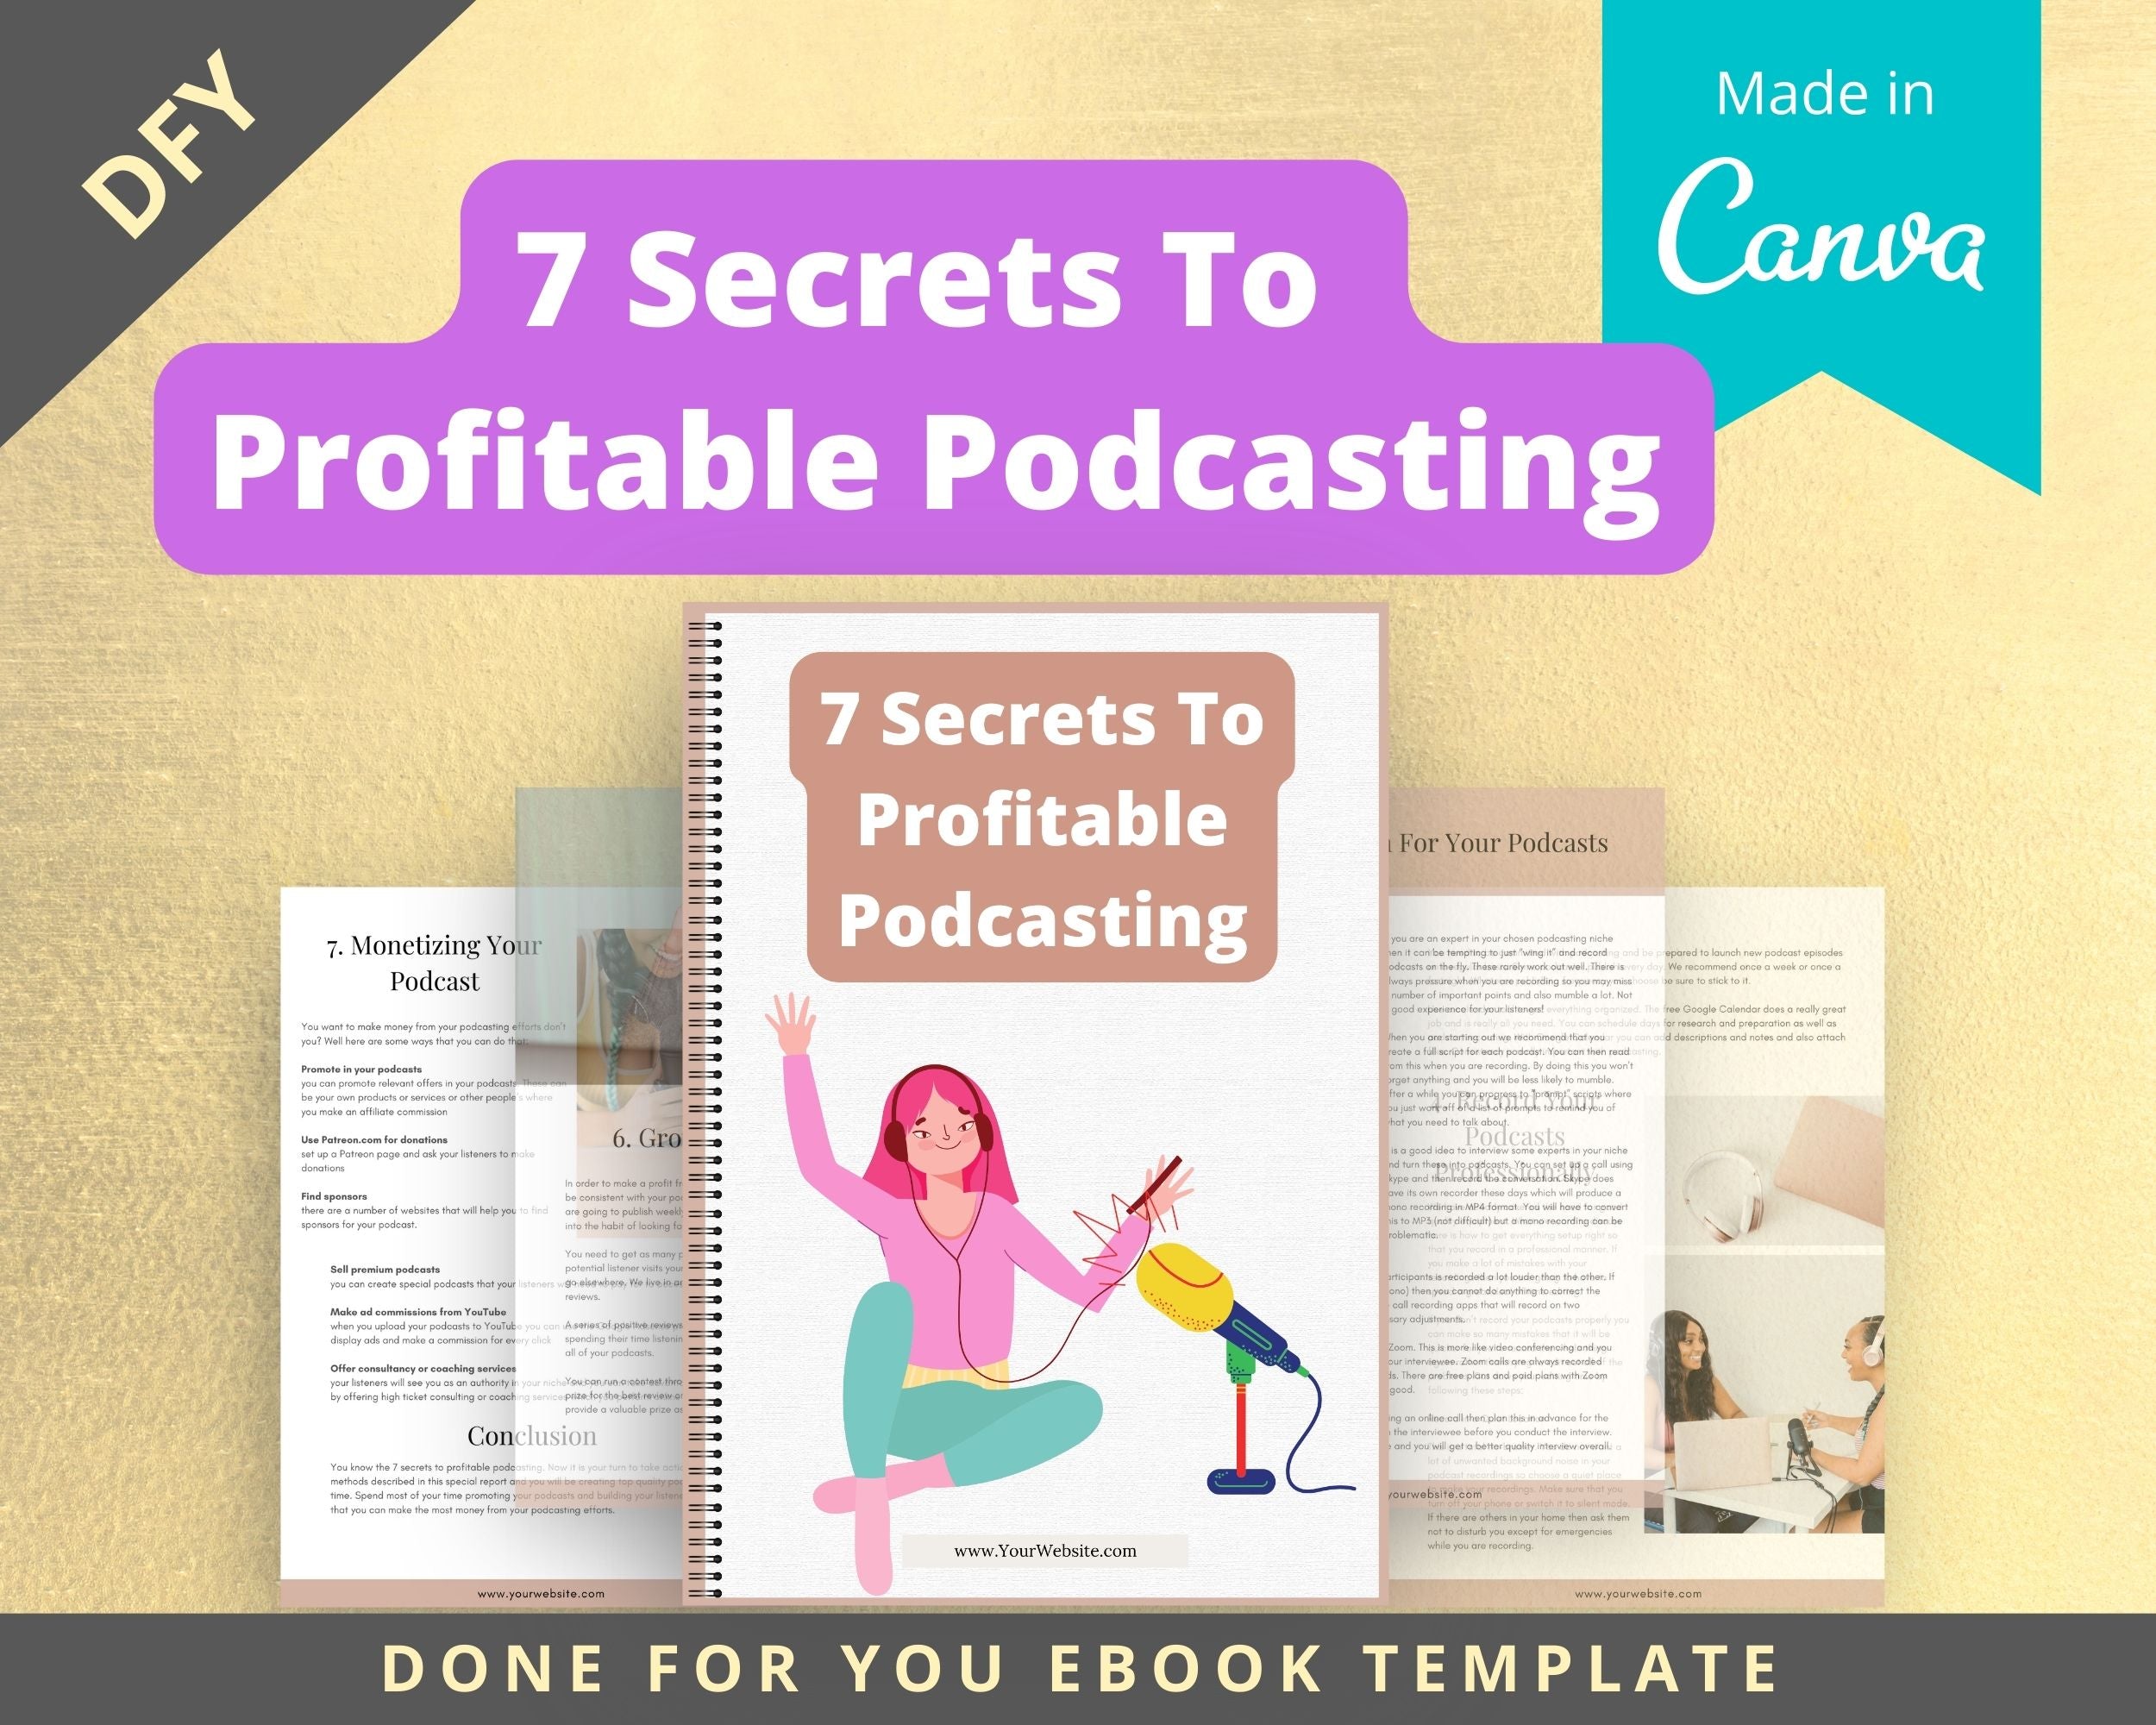 Editable 7 Secrets To Profitable Podcasting Ebook | Done-for-You Ebook in Canva | Rebrandable and Resizable Canva Template